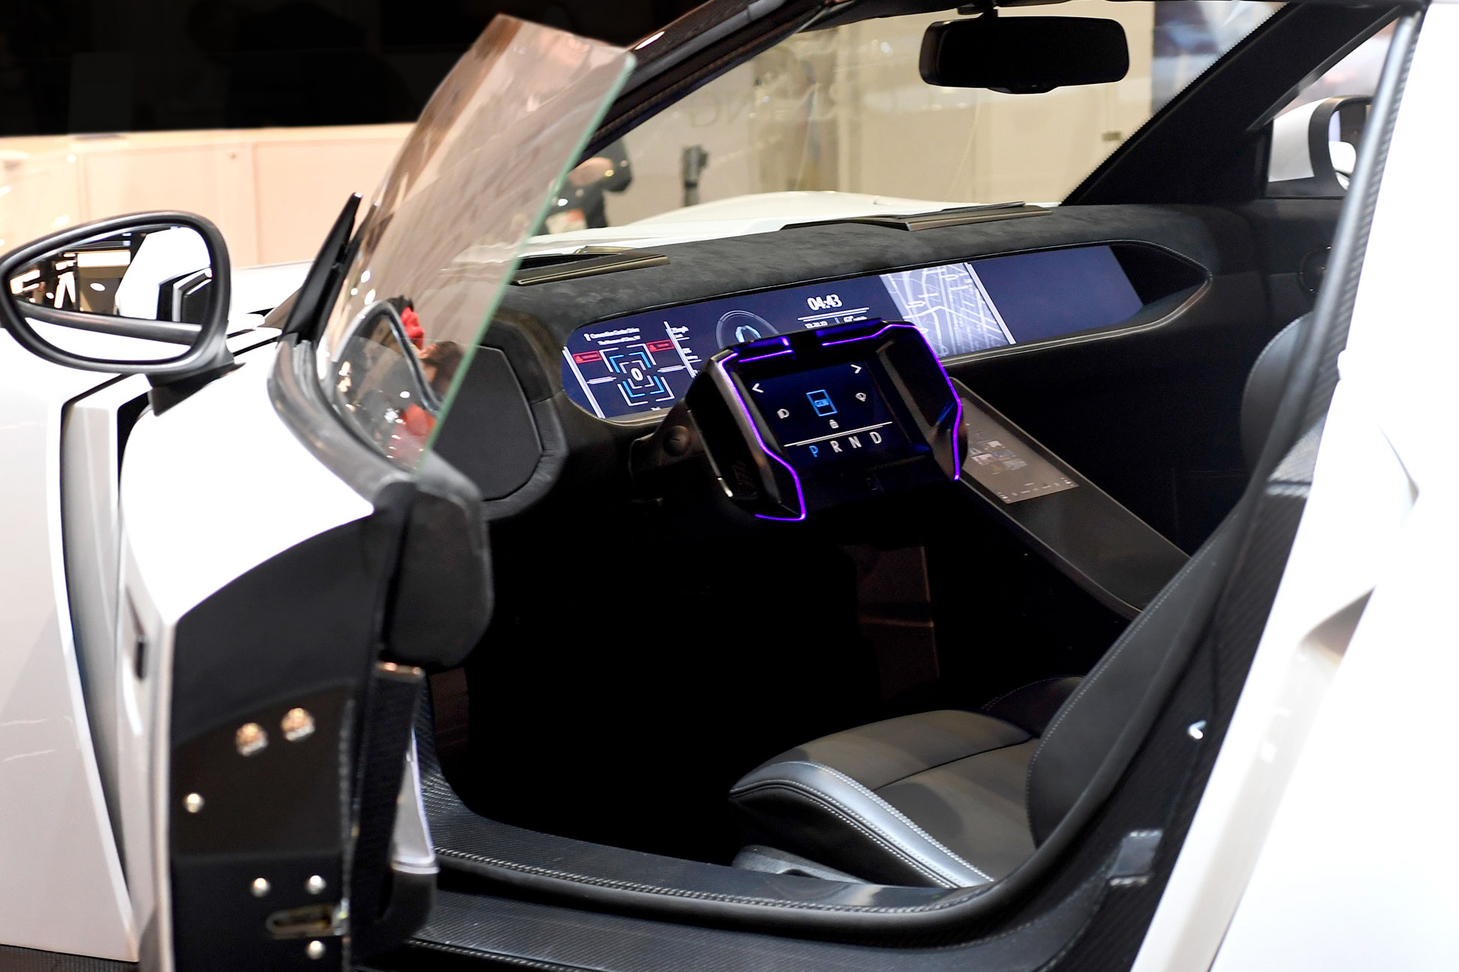 Corning Connected Car concept